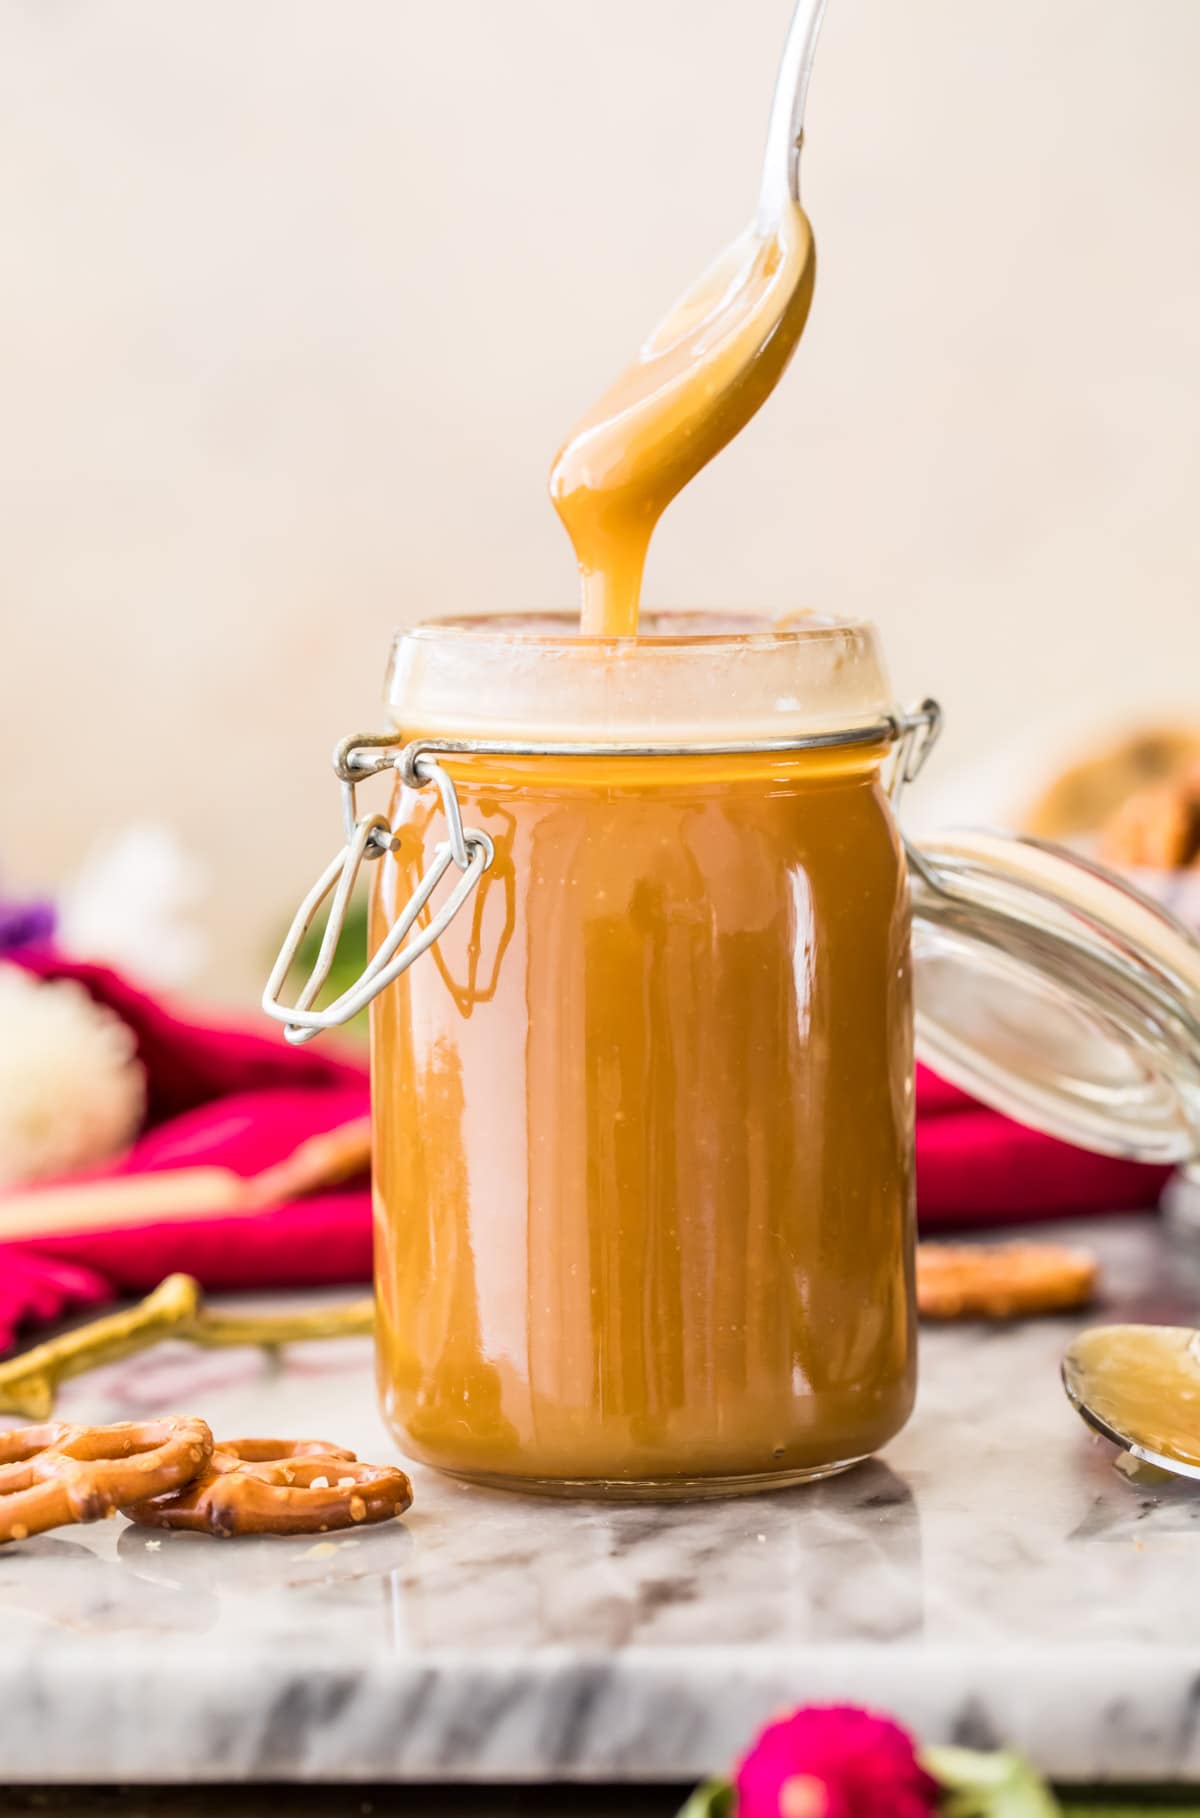 golden caramel sauce dripping off spoon into glass container